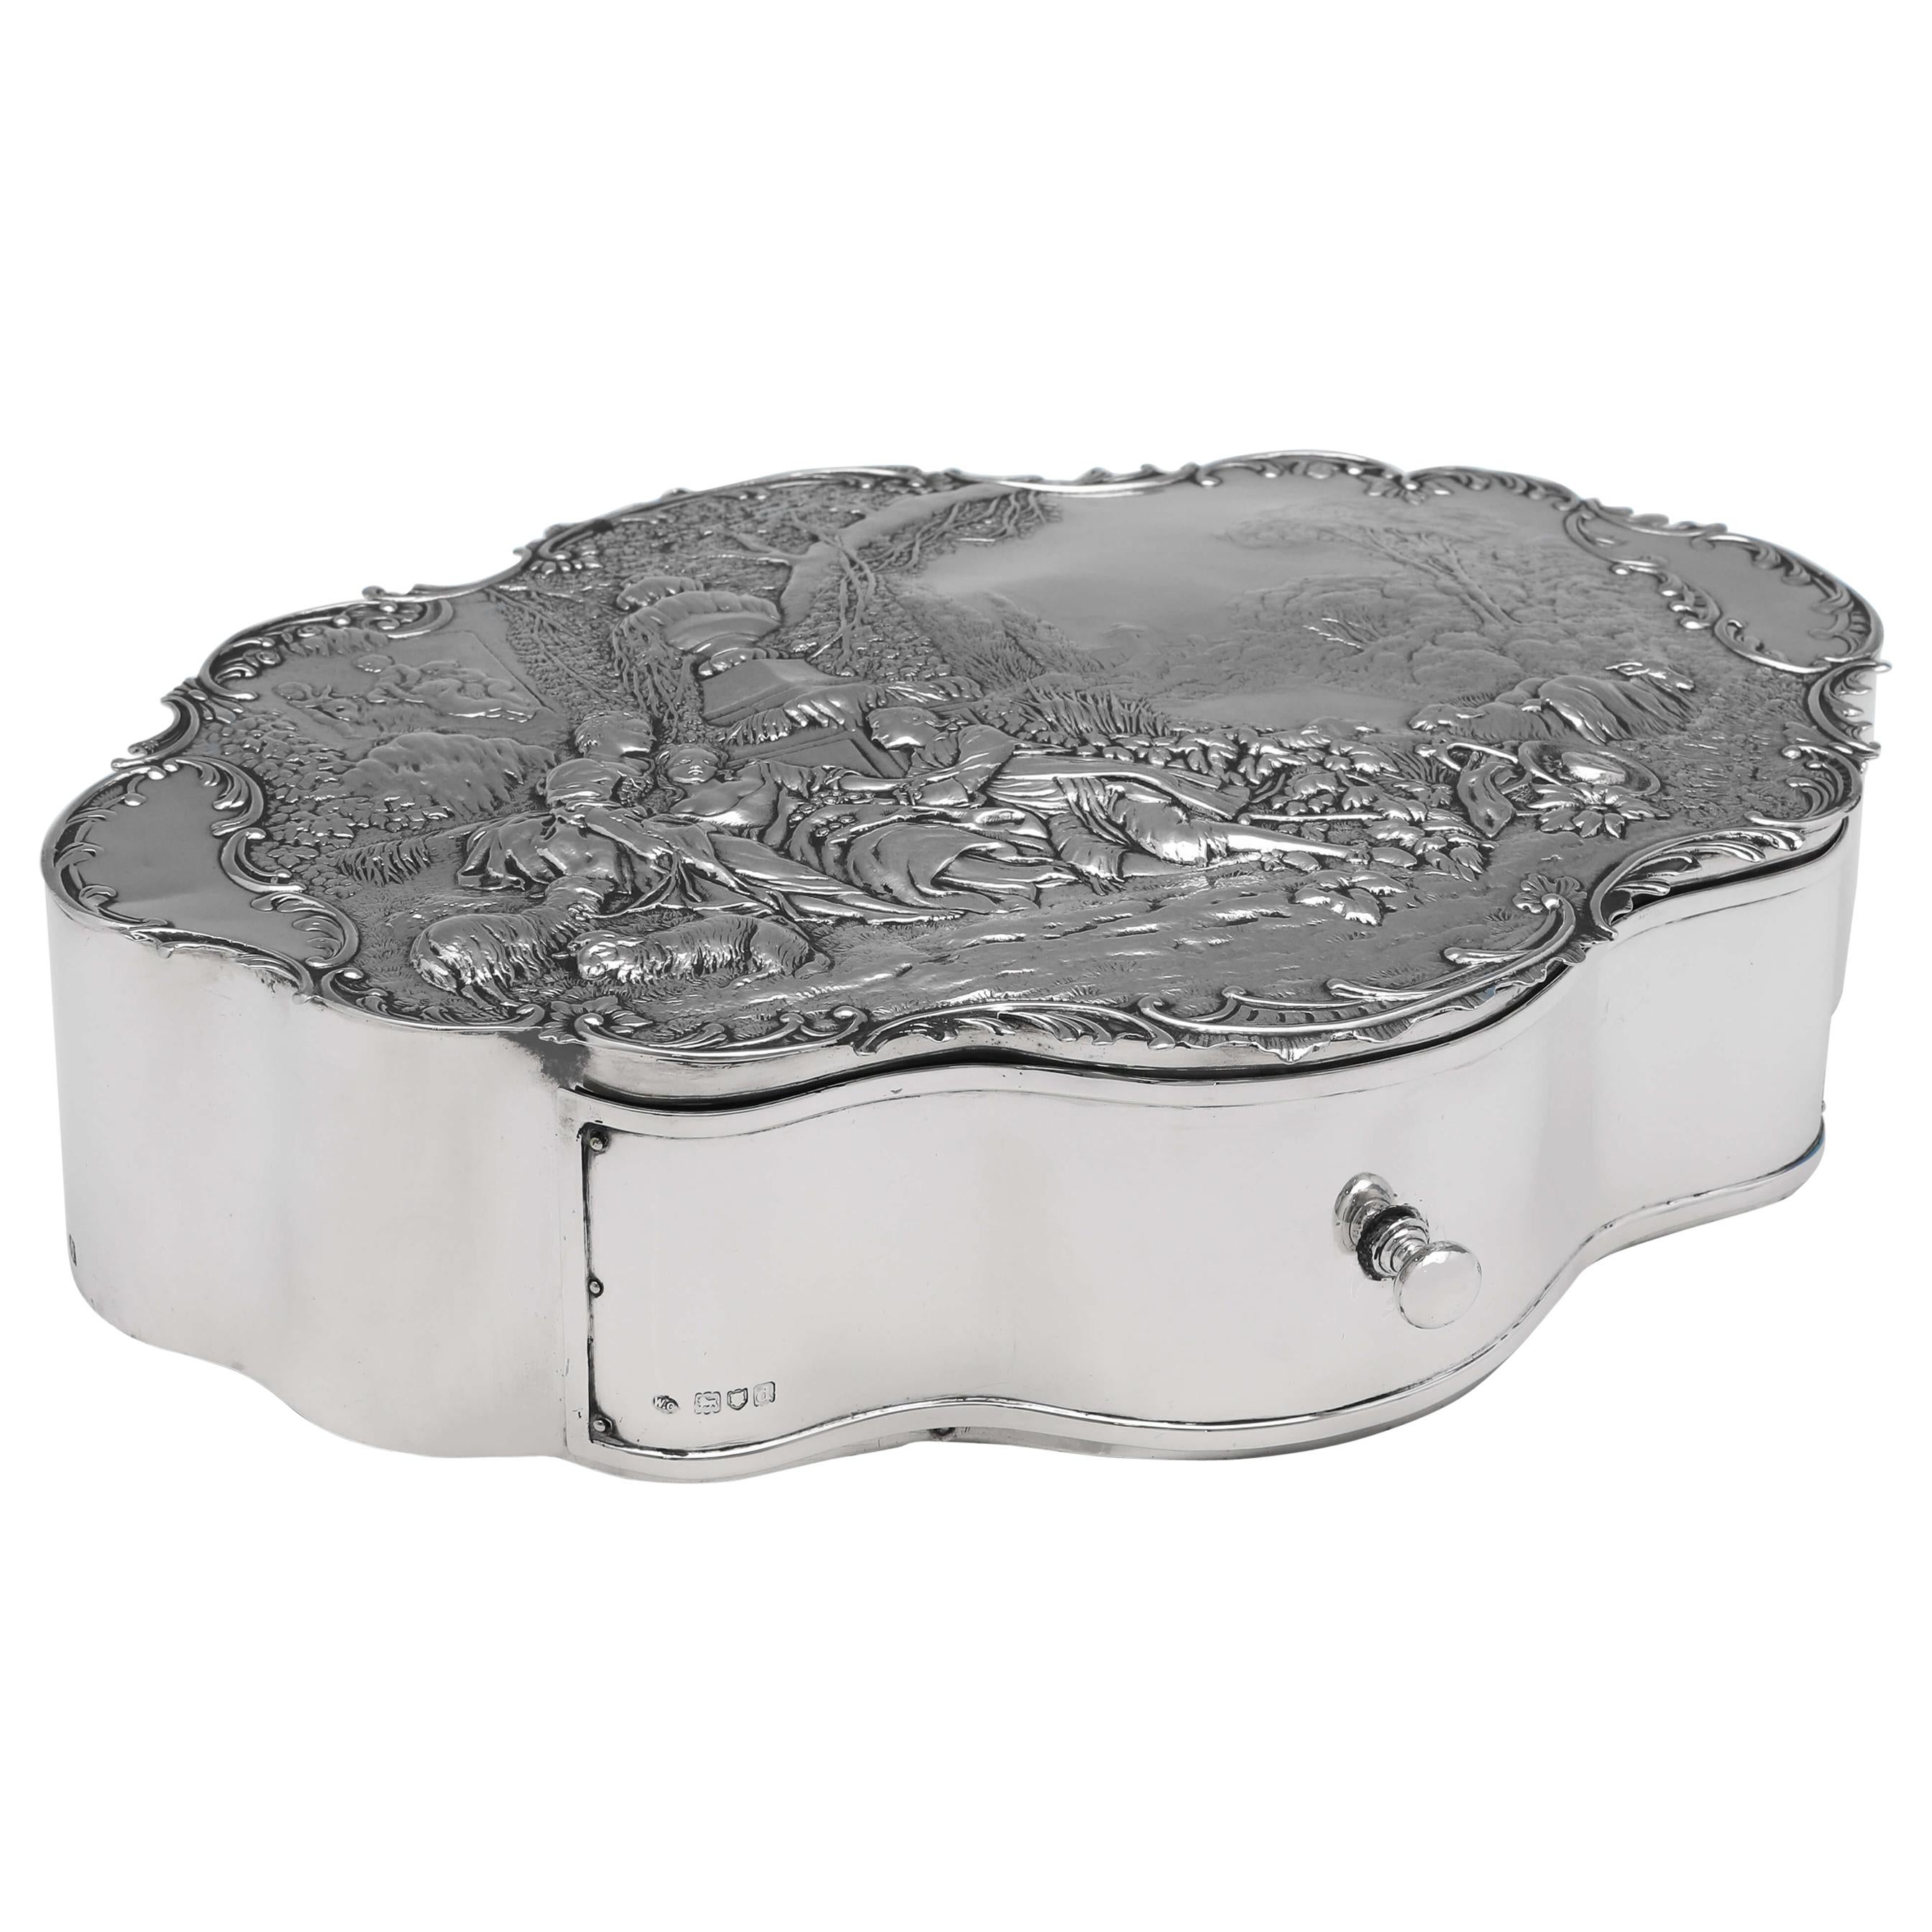 Victorian Antique Sterling Silver Jewellery Box, London 1899 by William Comyns